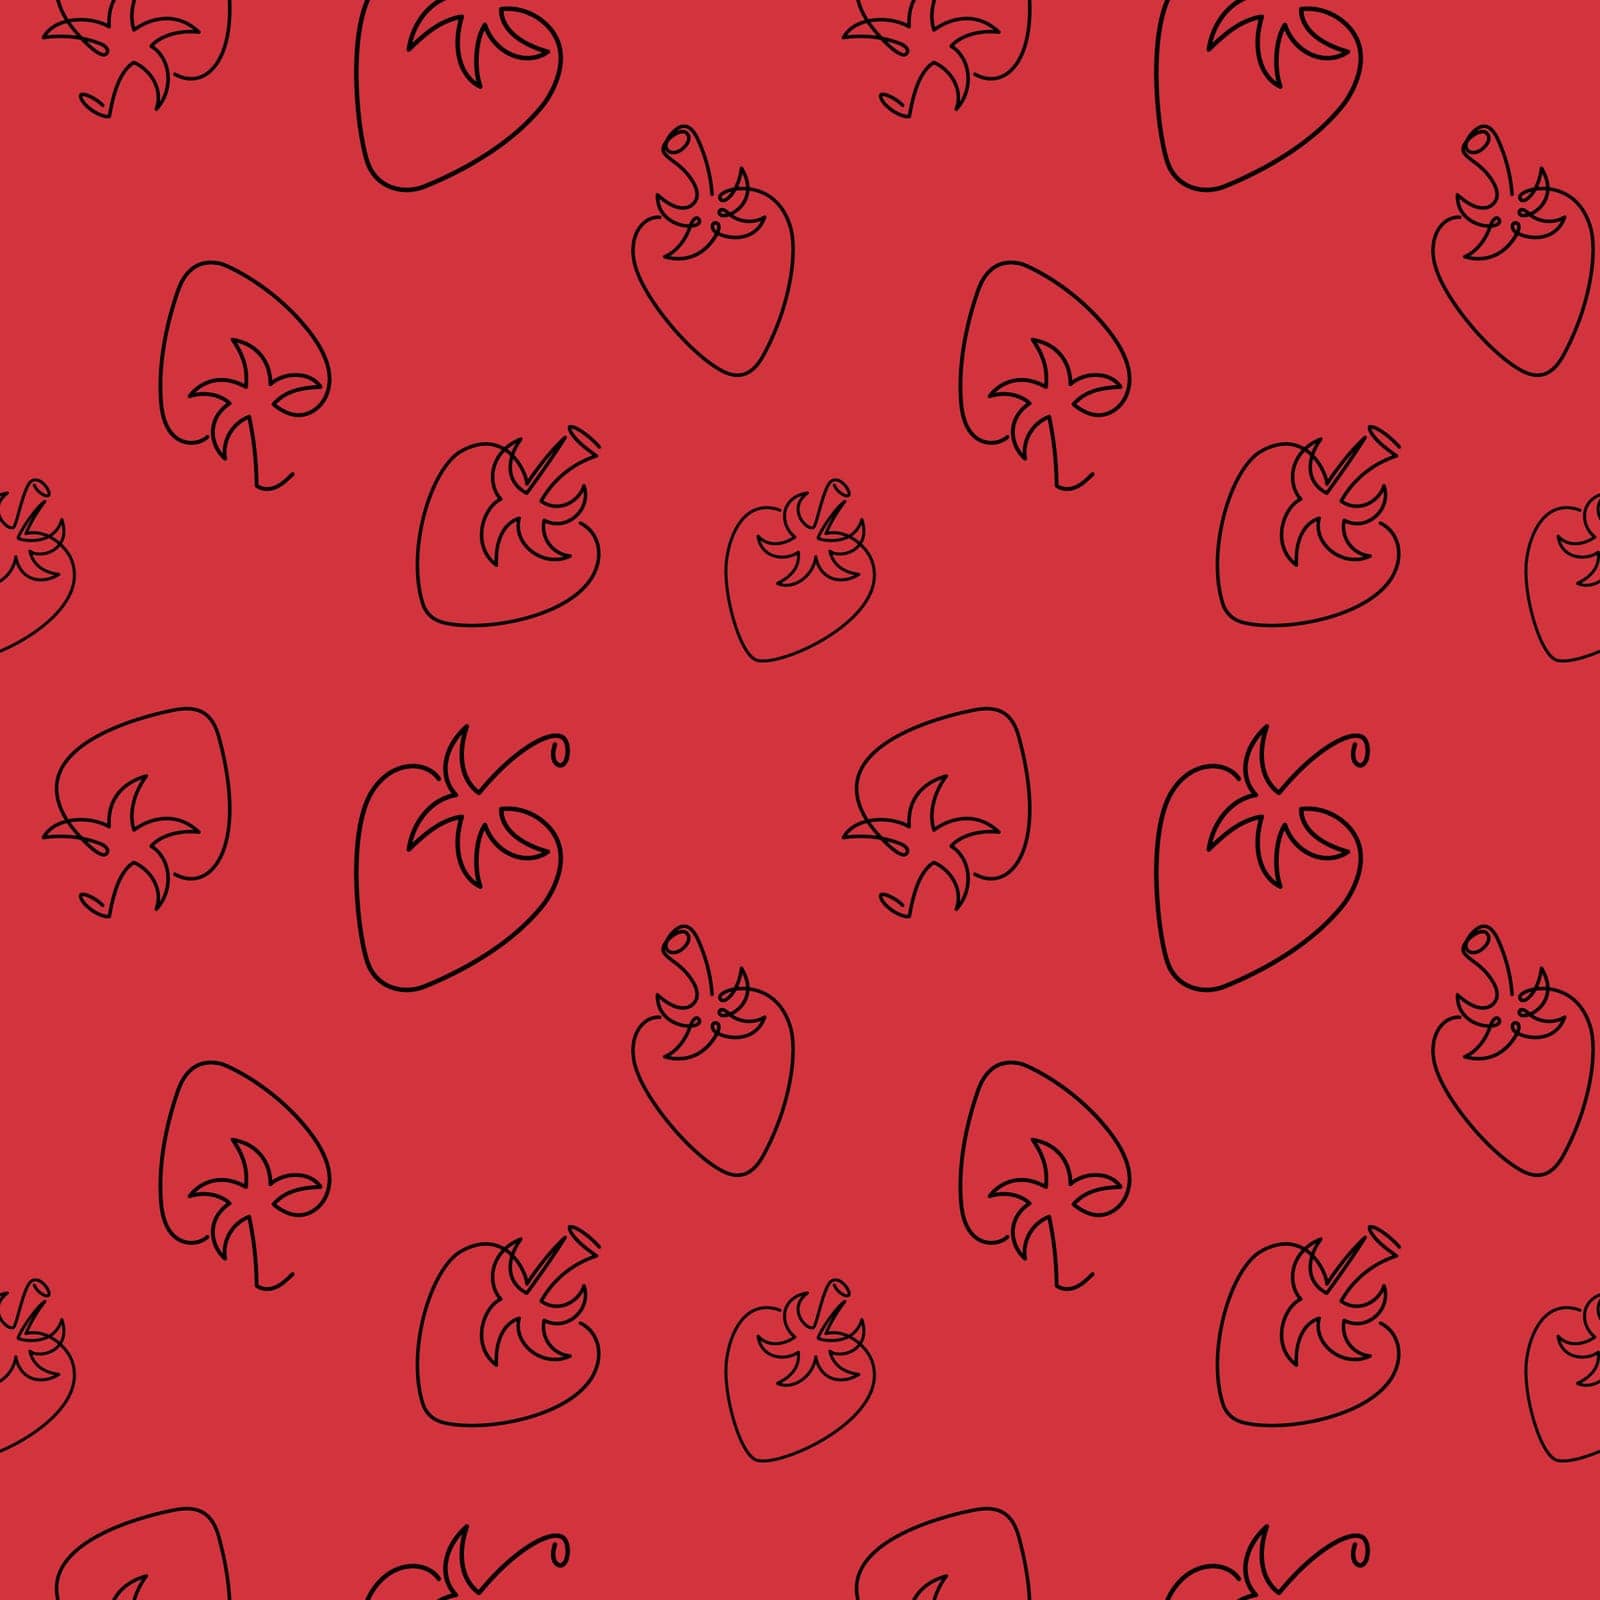 Strawberry seamless pattern. Single line art style strawberry on red background. Abstract creative food illustration in minimalism design. Hand drawn vector illustration. Line art doodle style